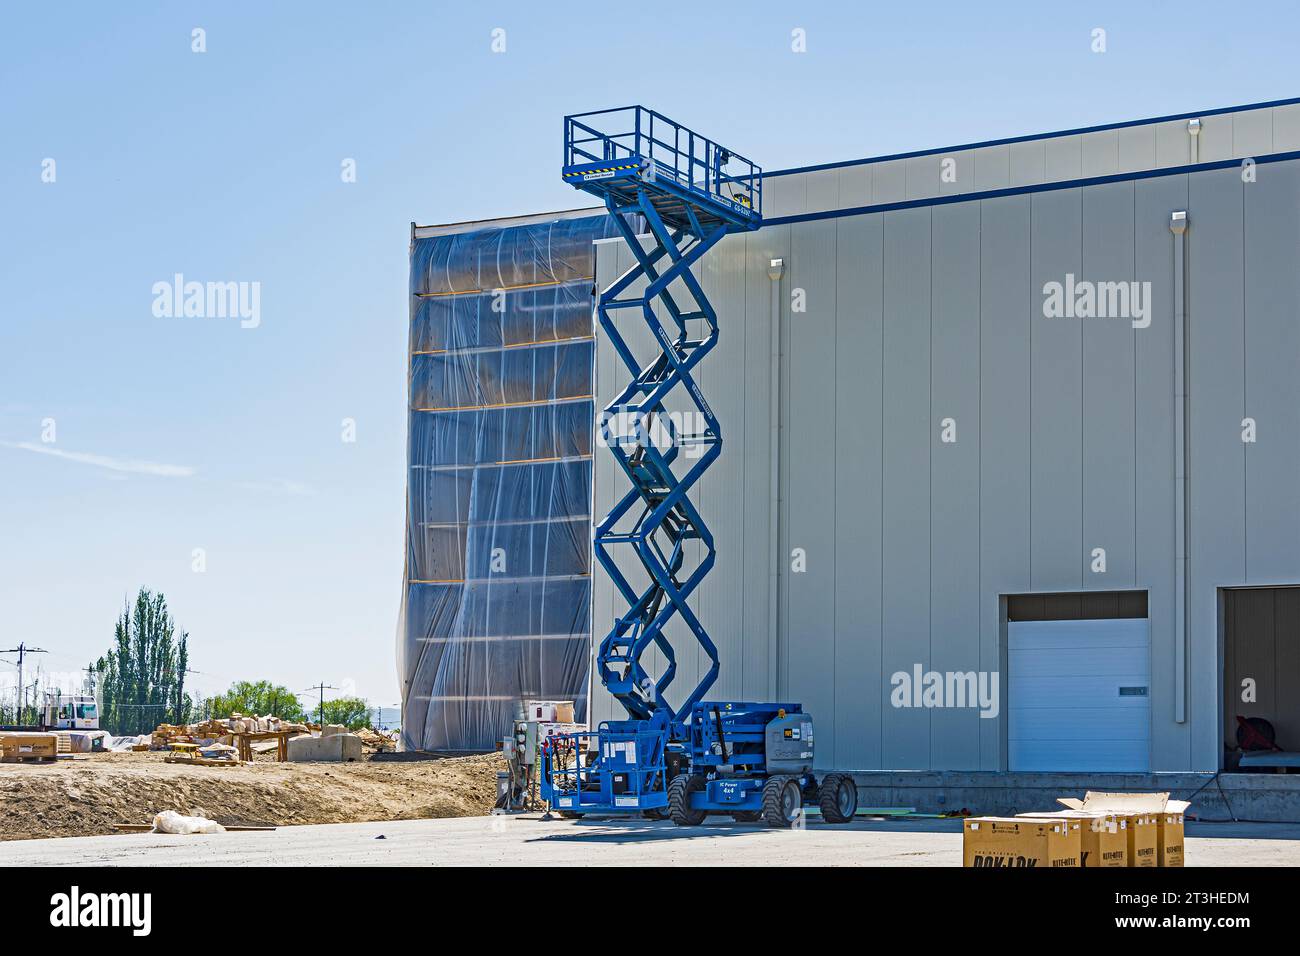 A large rental scissor-lift is used to transport personnel and materials to the roof at a construction site. Stock Photo